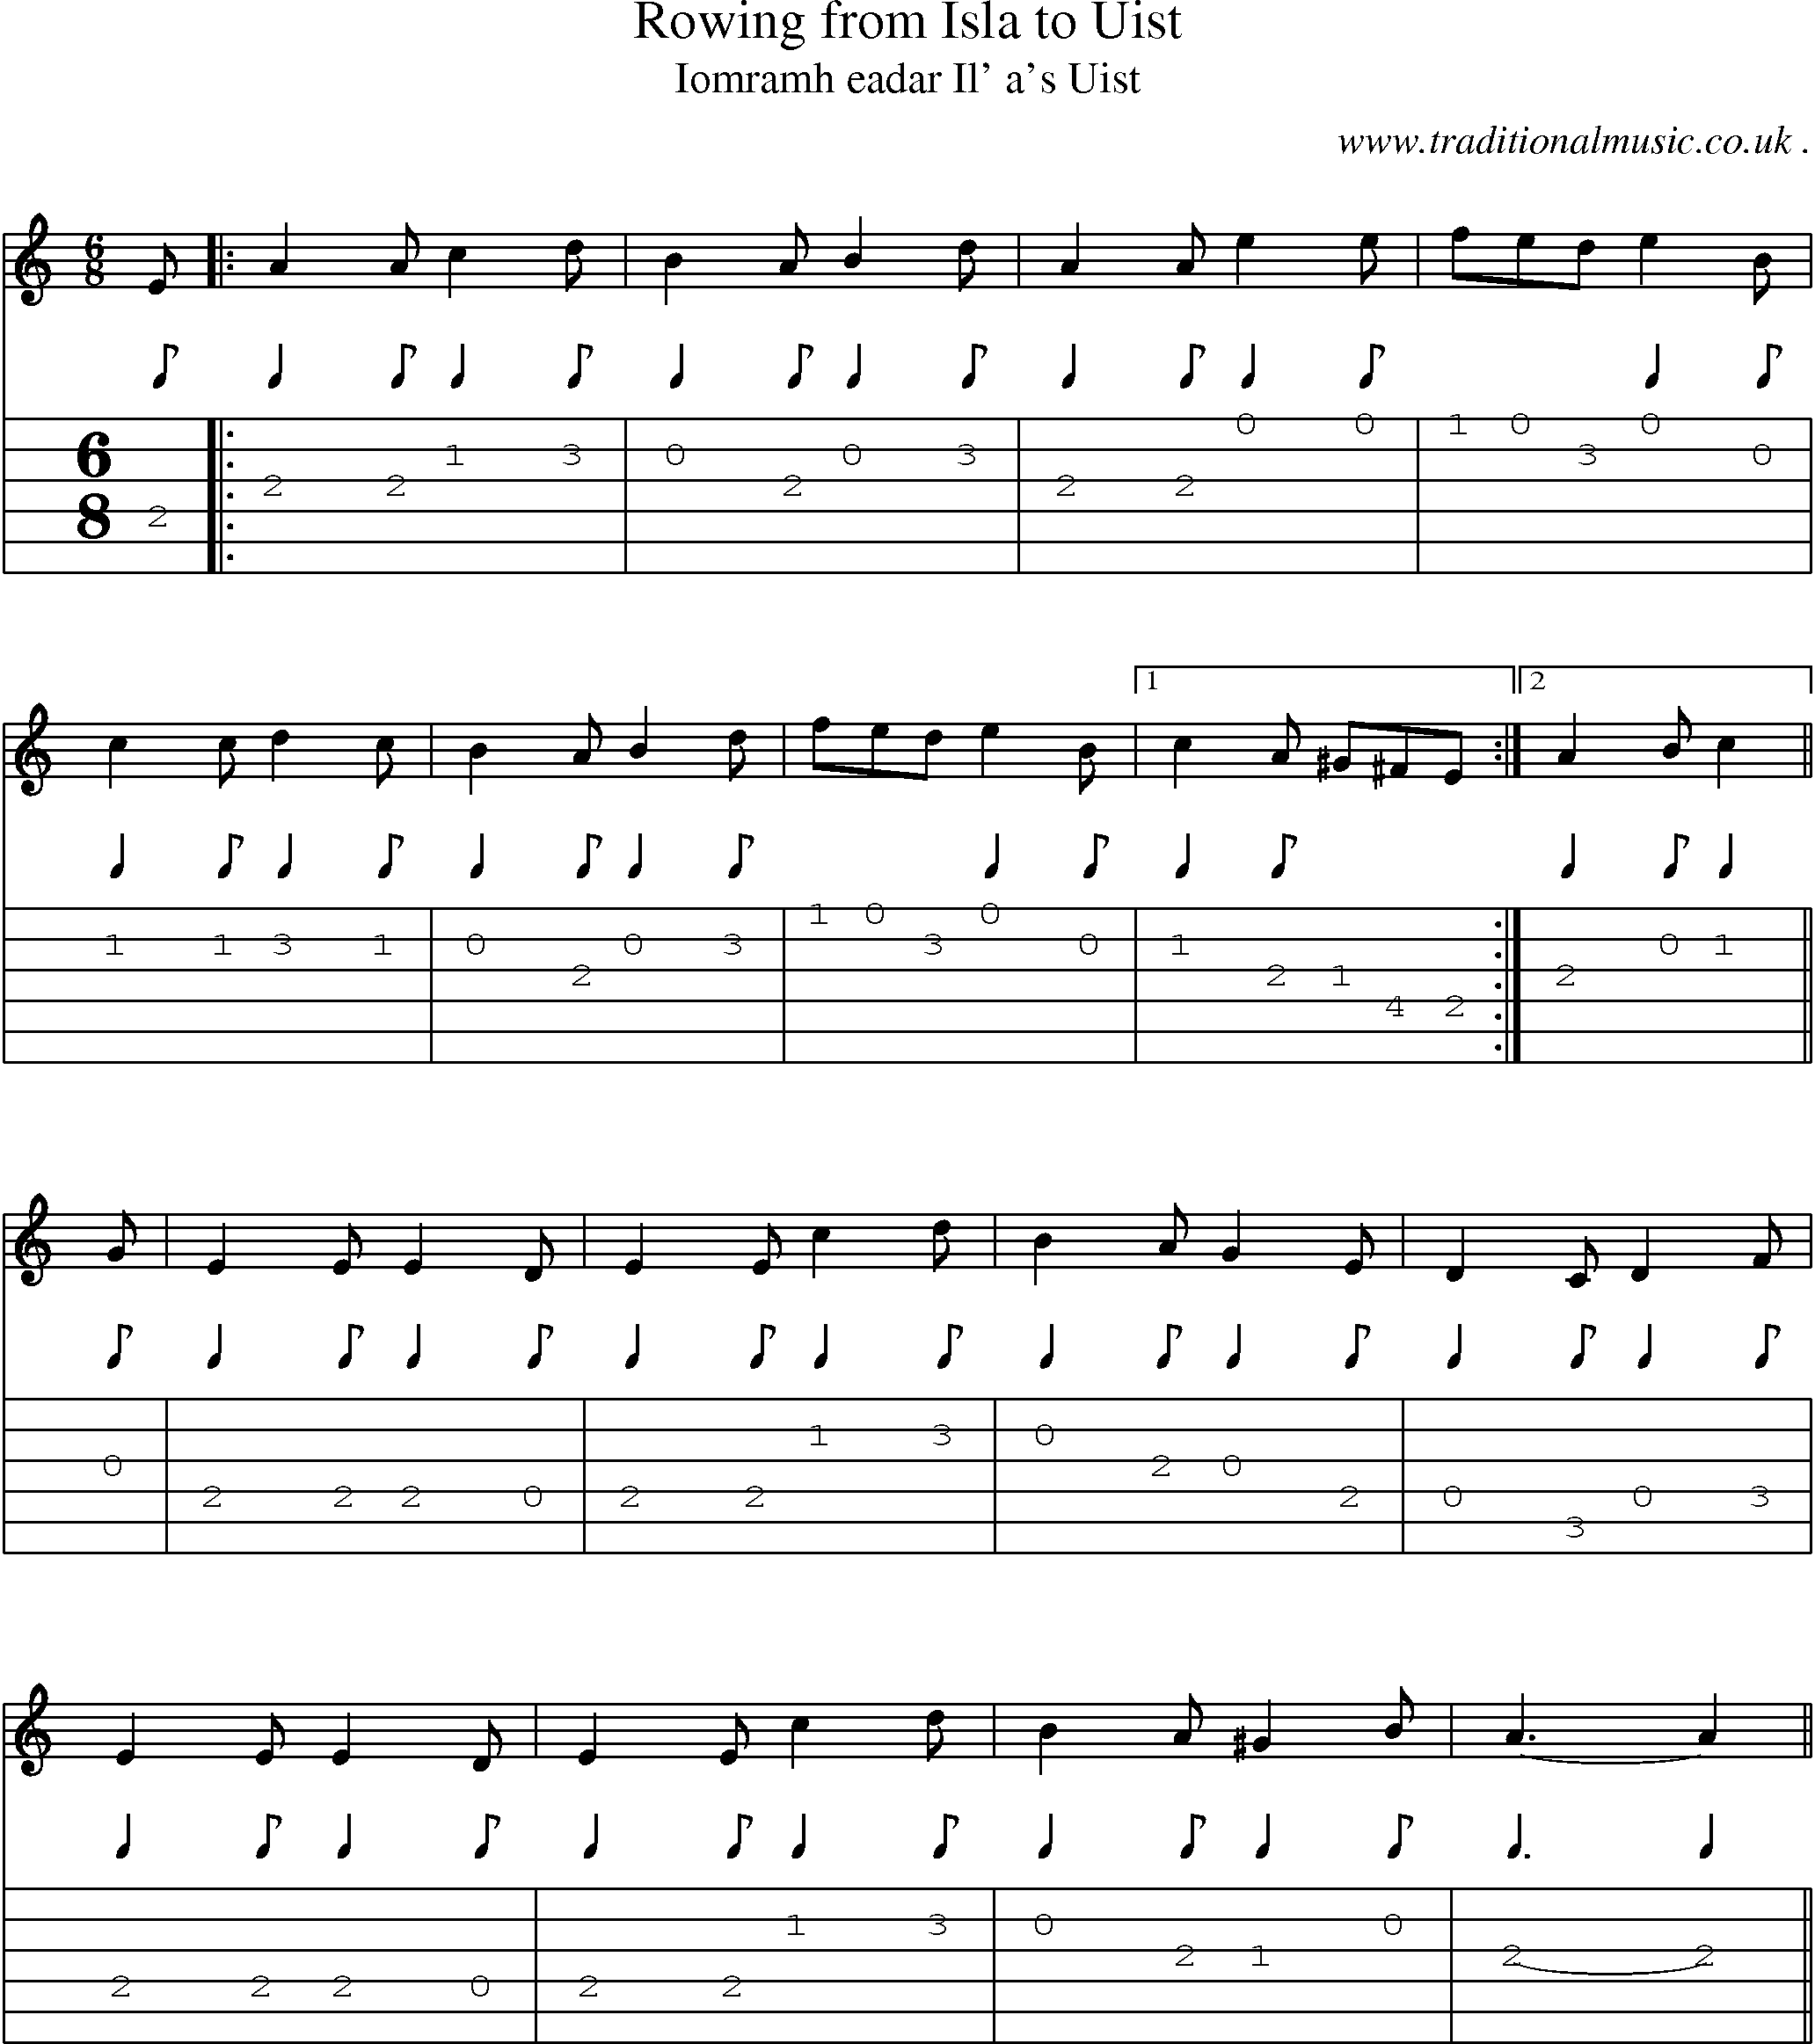 Sheet-music  score, Chords and Guitar Tabs for Rowing From Isla To Uist